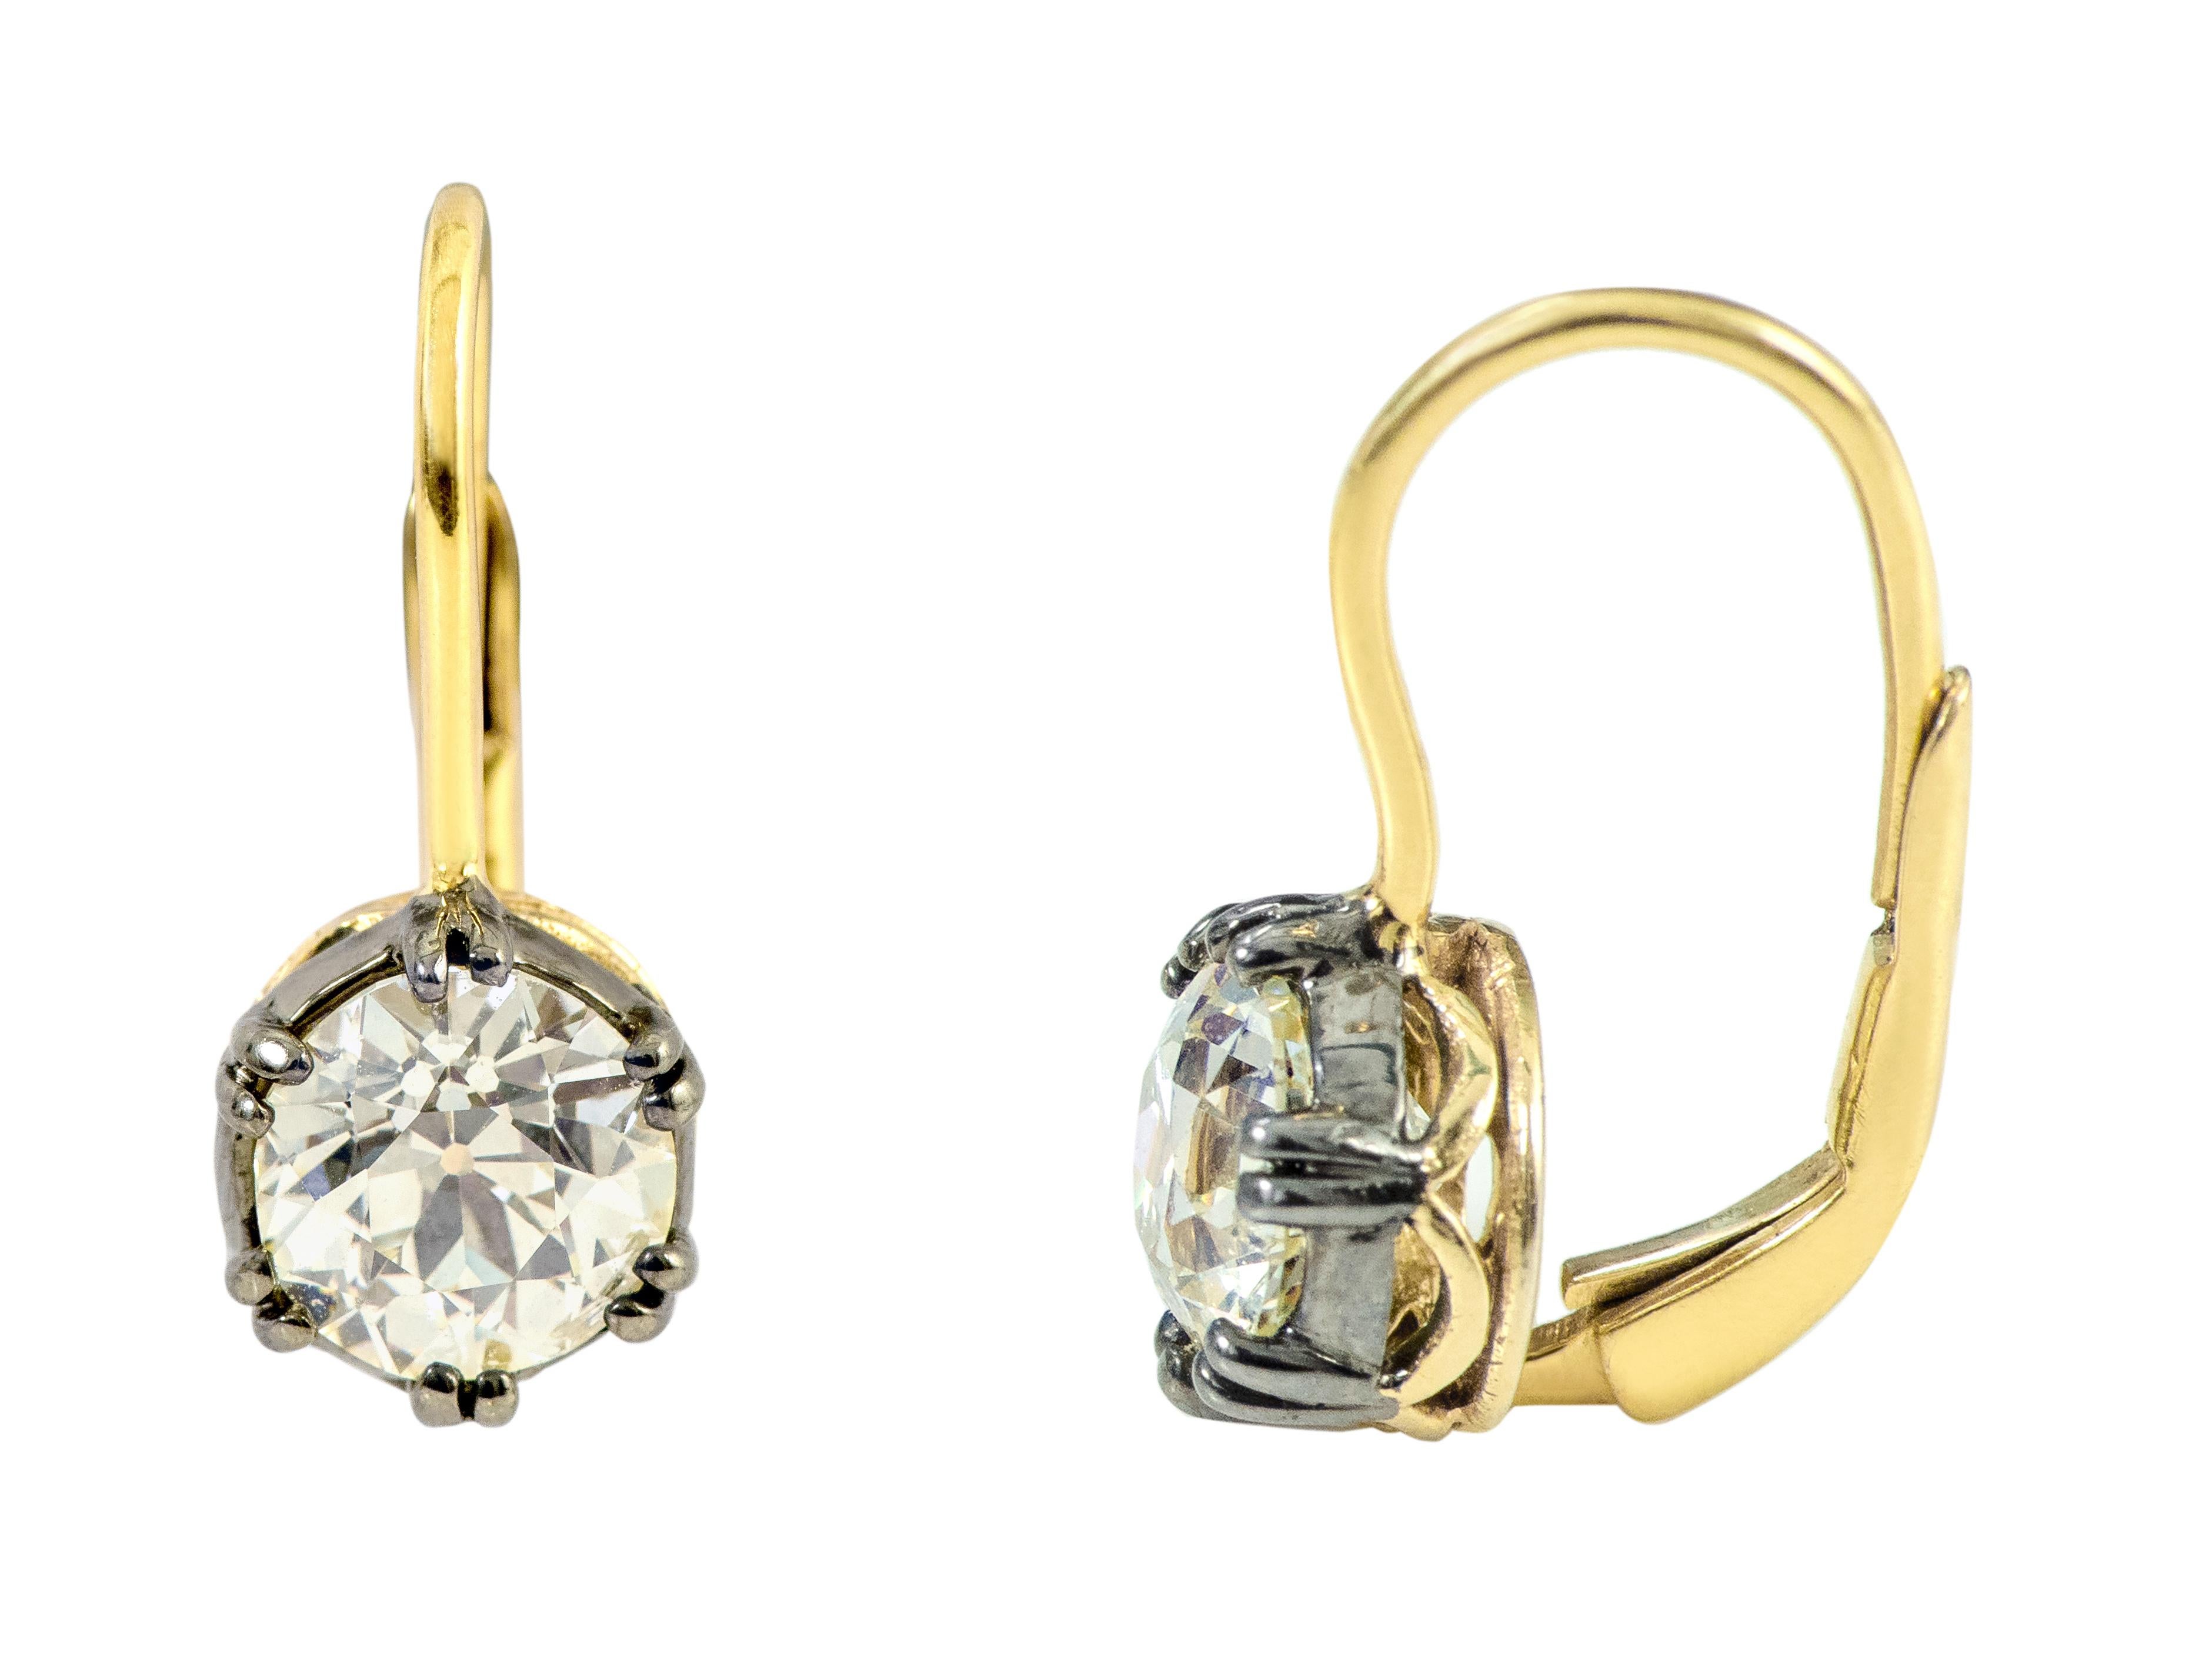 18 Karat Gold 3.22 Carat Old European Cut Diamond Solitaire Drop Earrings

This perfect old mutual/European cut diamond solitaire pair is exceptional. The diamond pair of 3.22 carat is an antique 58 facet cut without the precision of the modern